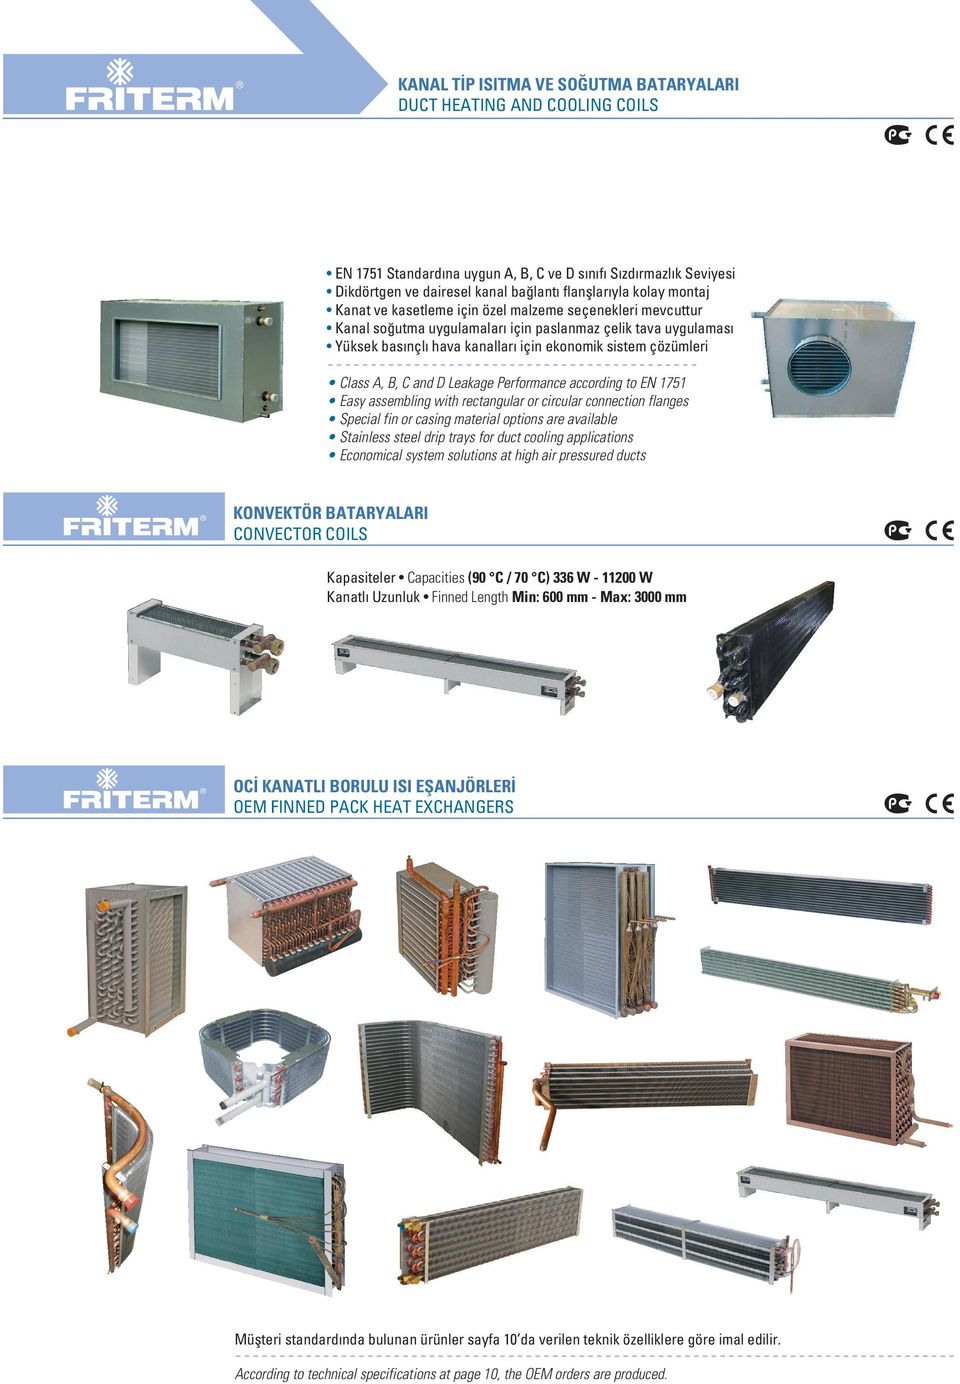 C and D Leakage Performance according to EN 1751 Easy assembling with rectangular or circular connection flanges Special fin or casing material options are available Stainless steel drip trays for